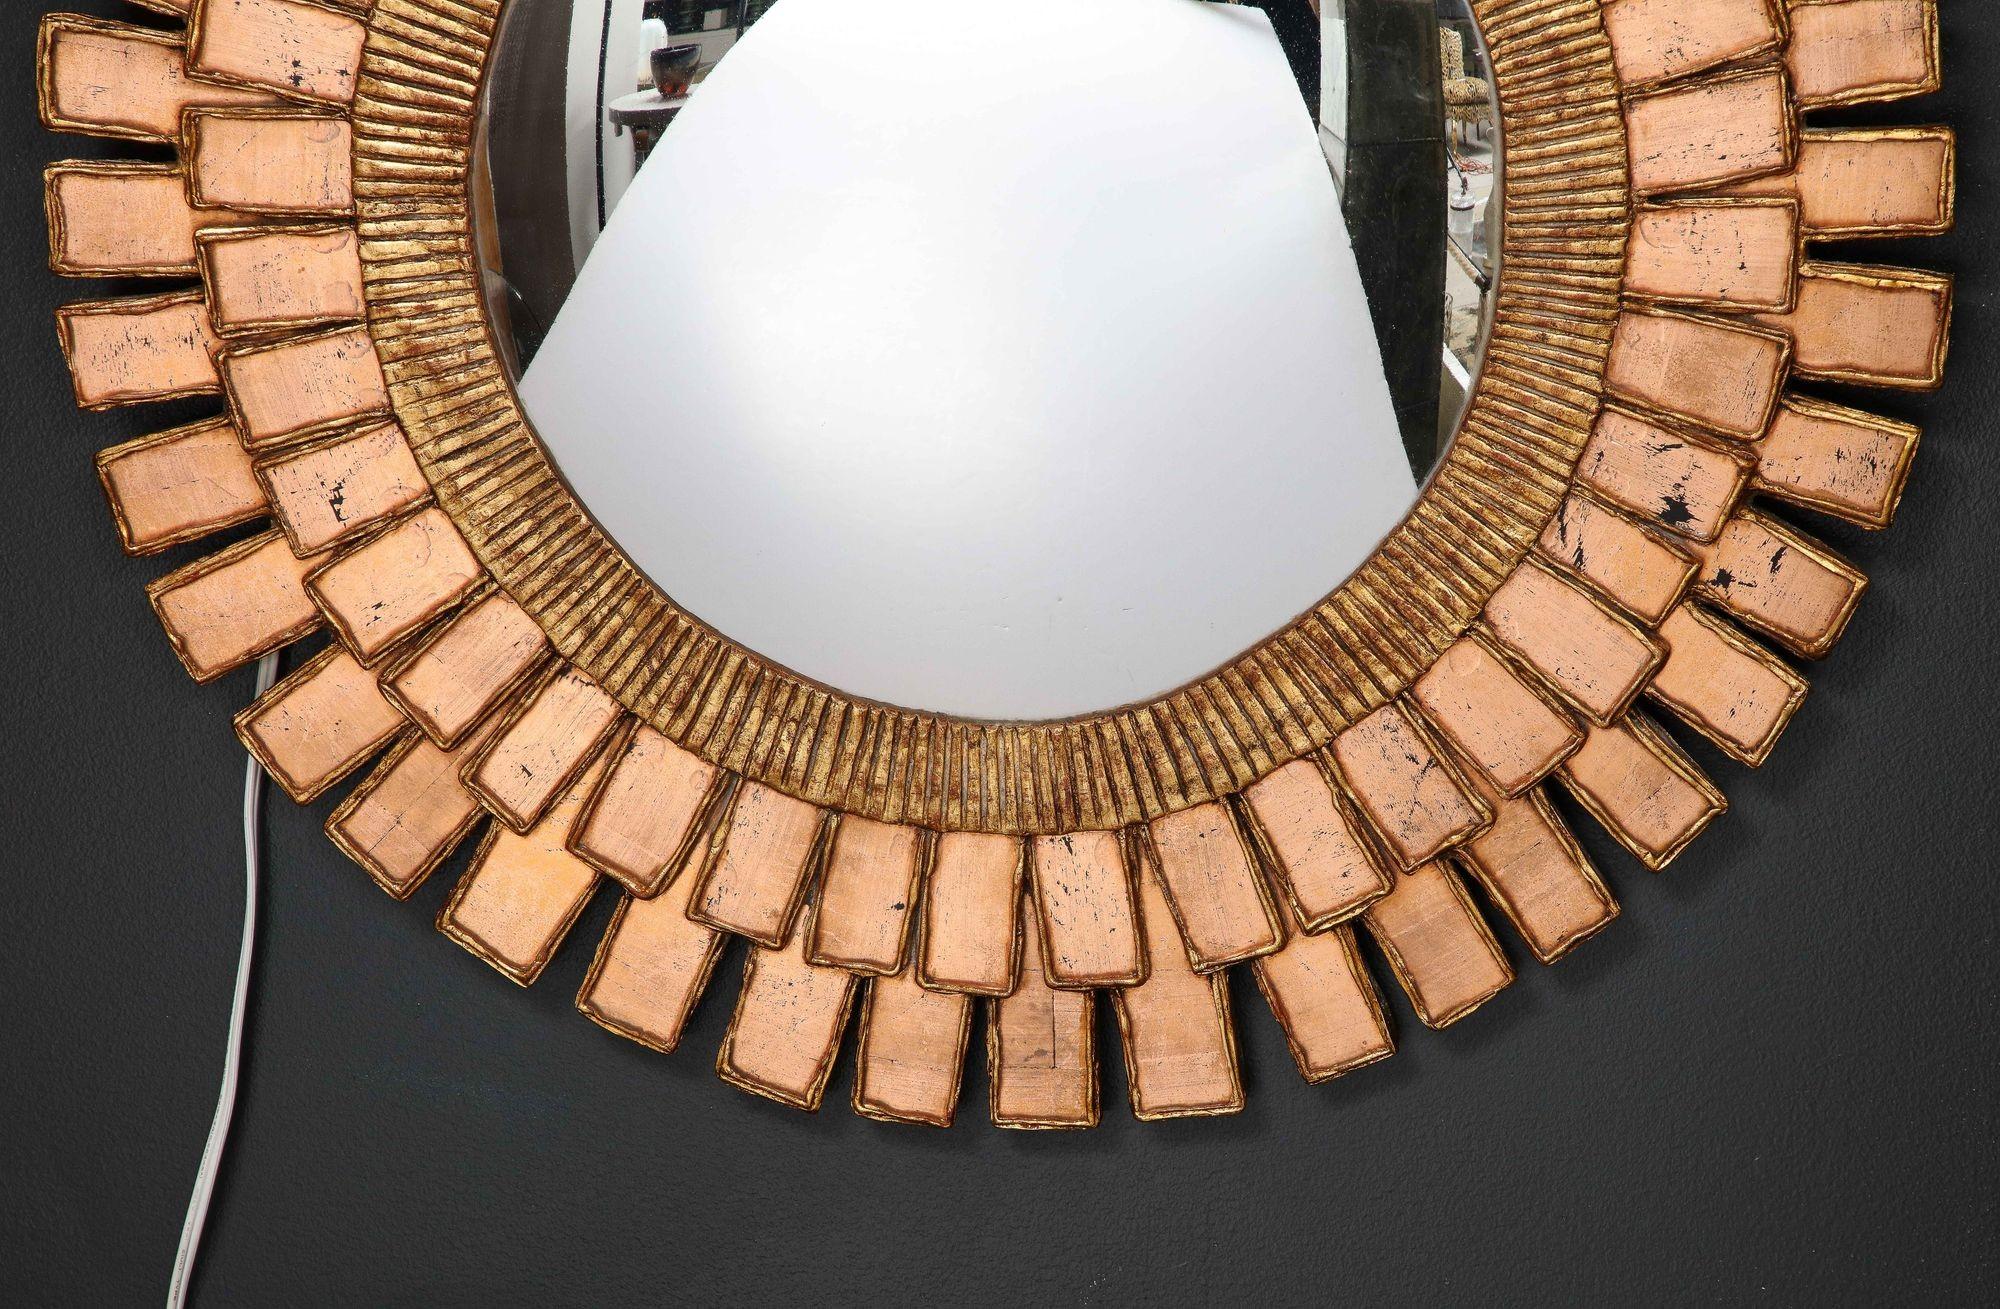 A stunning Line Vautrin Style Resin and Wood Mirror.